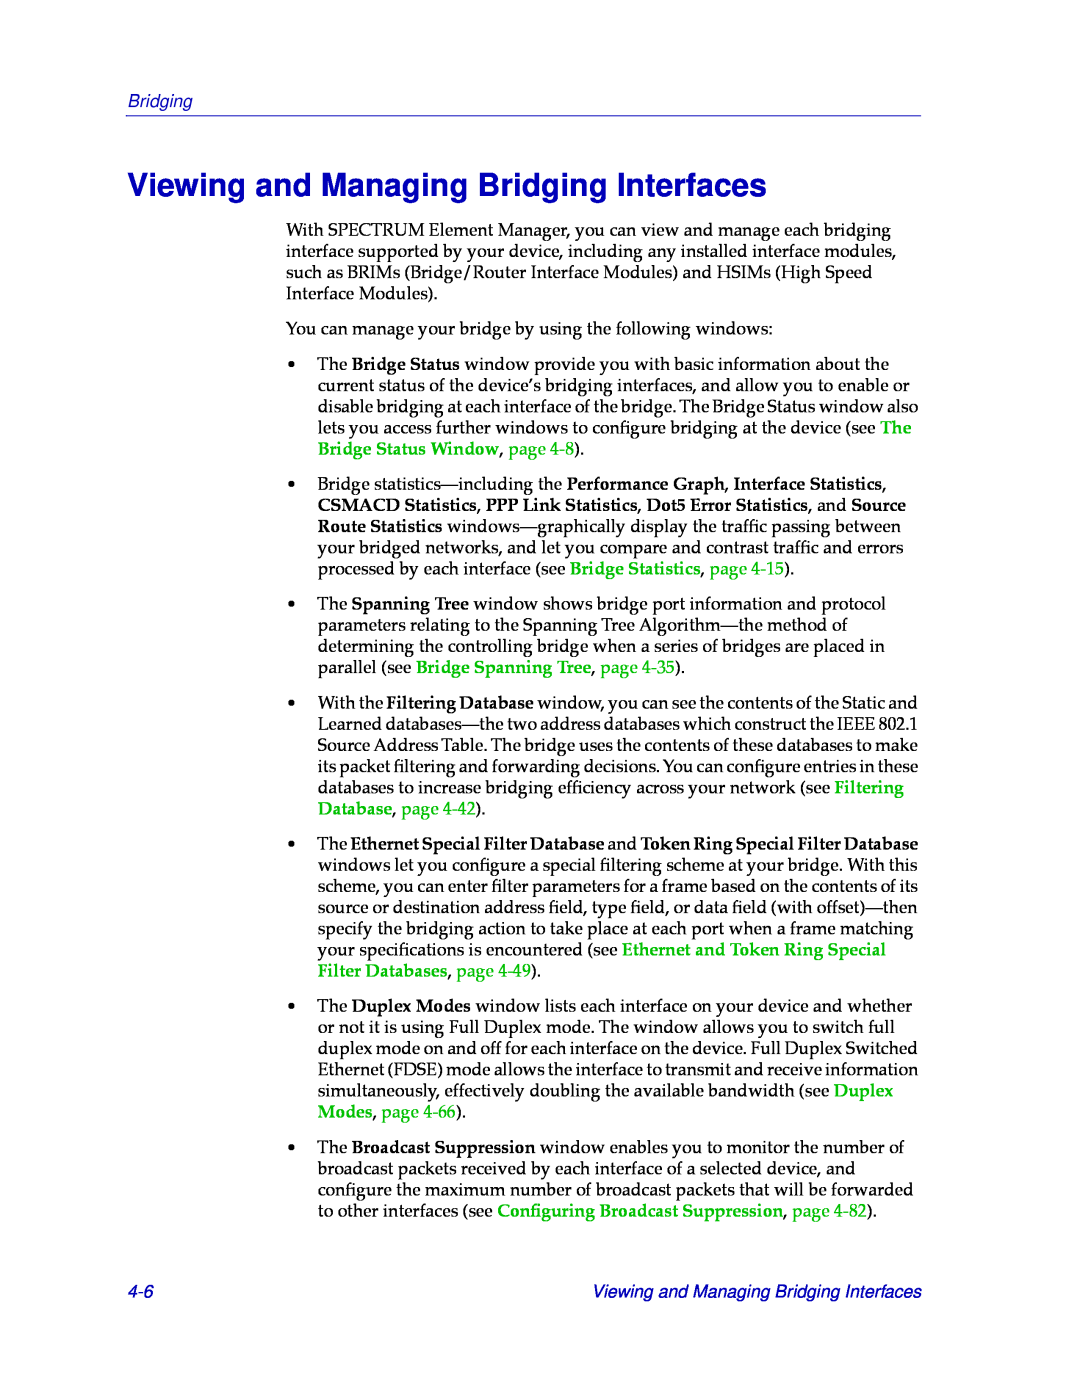 Cabletron Systems CSX400, CSX200 manual Viewing and Managing Bridging Interfaces 